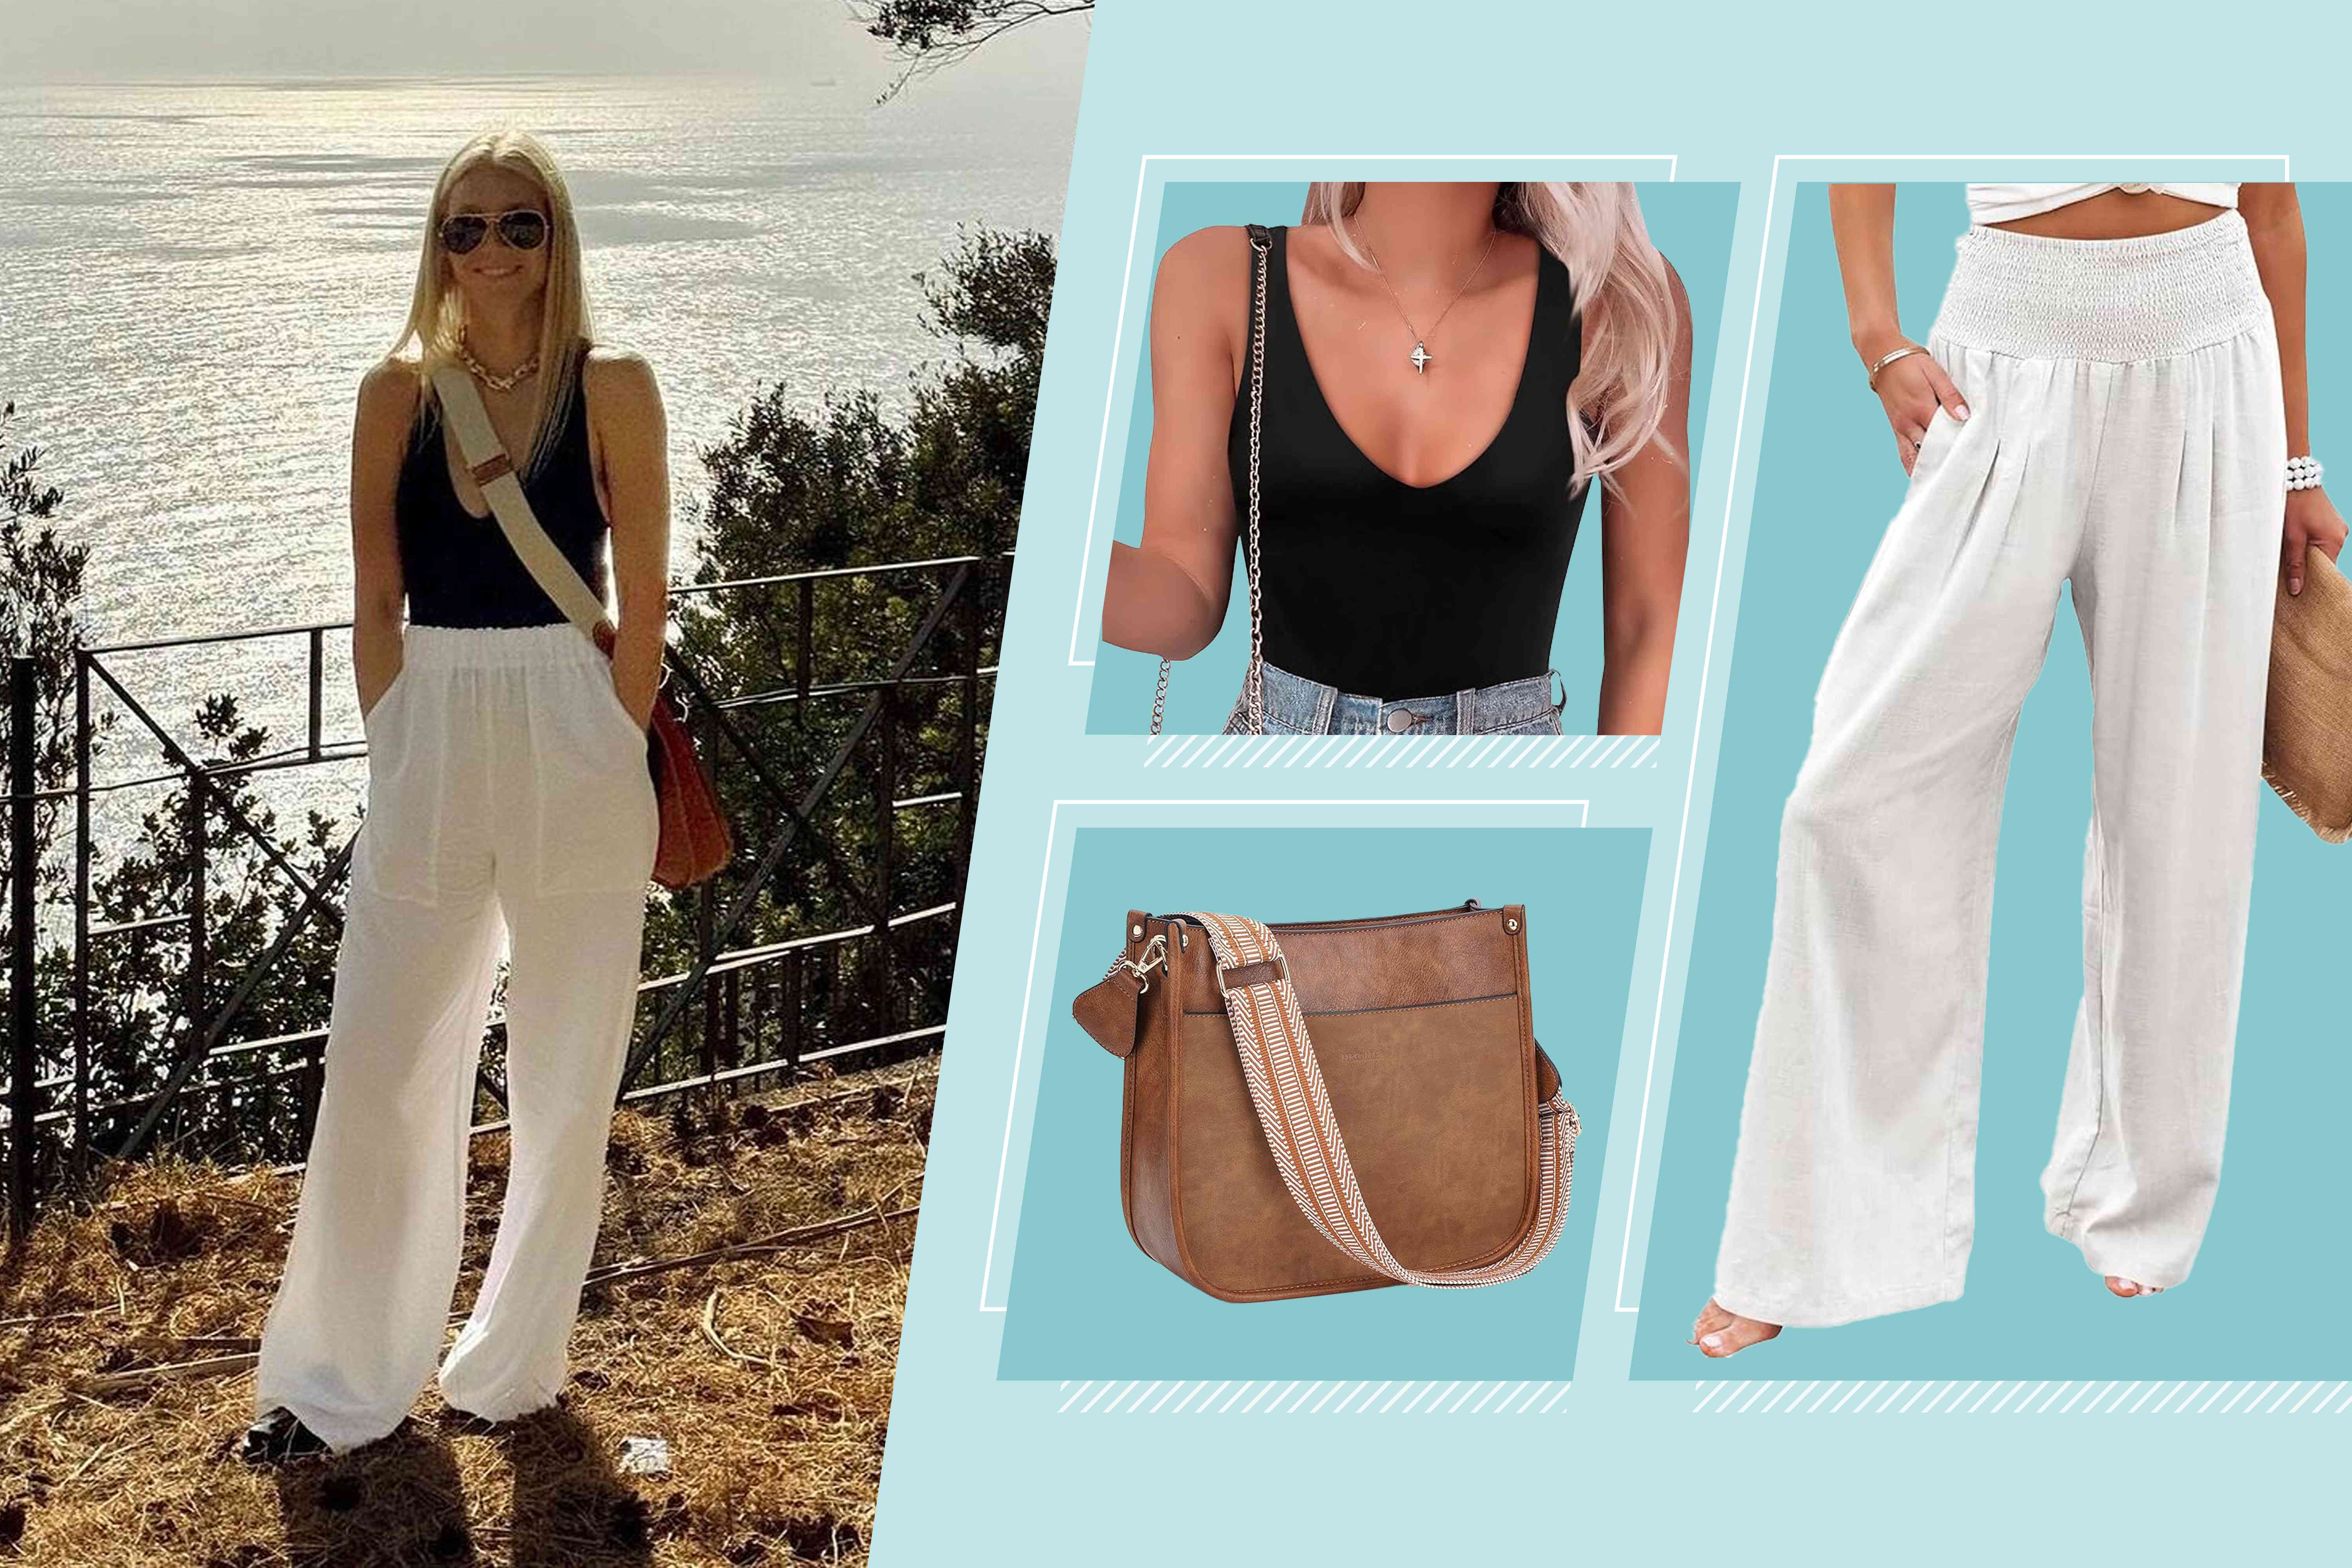 Gwyneth Paltrow Just Sported an Upsized Version of the Fuss-Free Bag Hollywood Can’t Stop Wearing